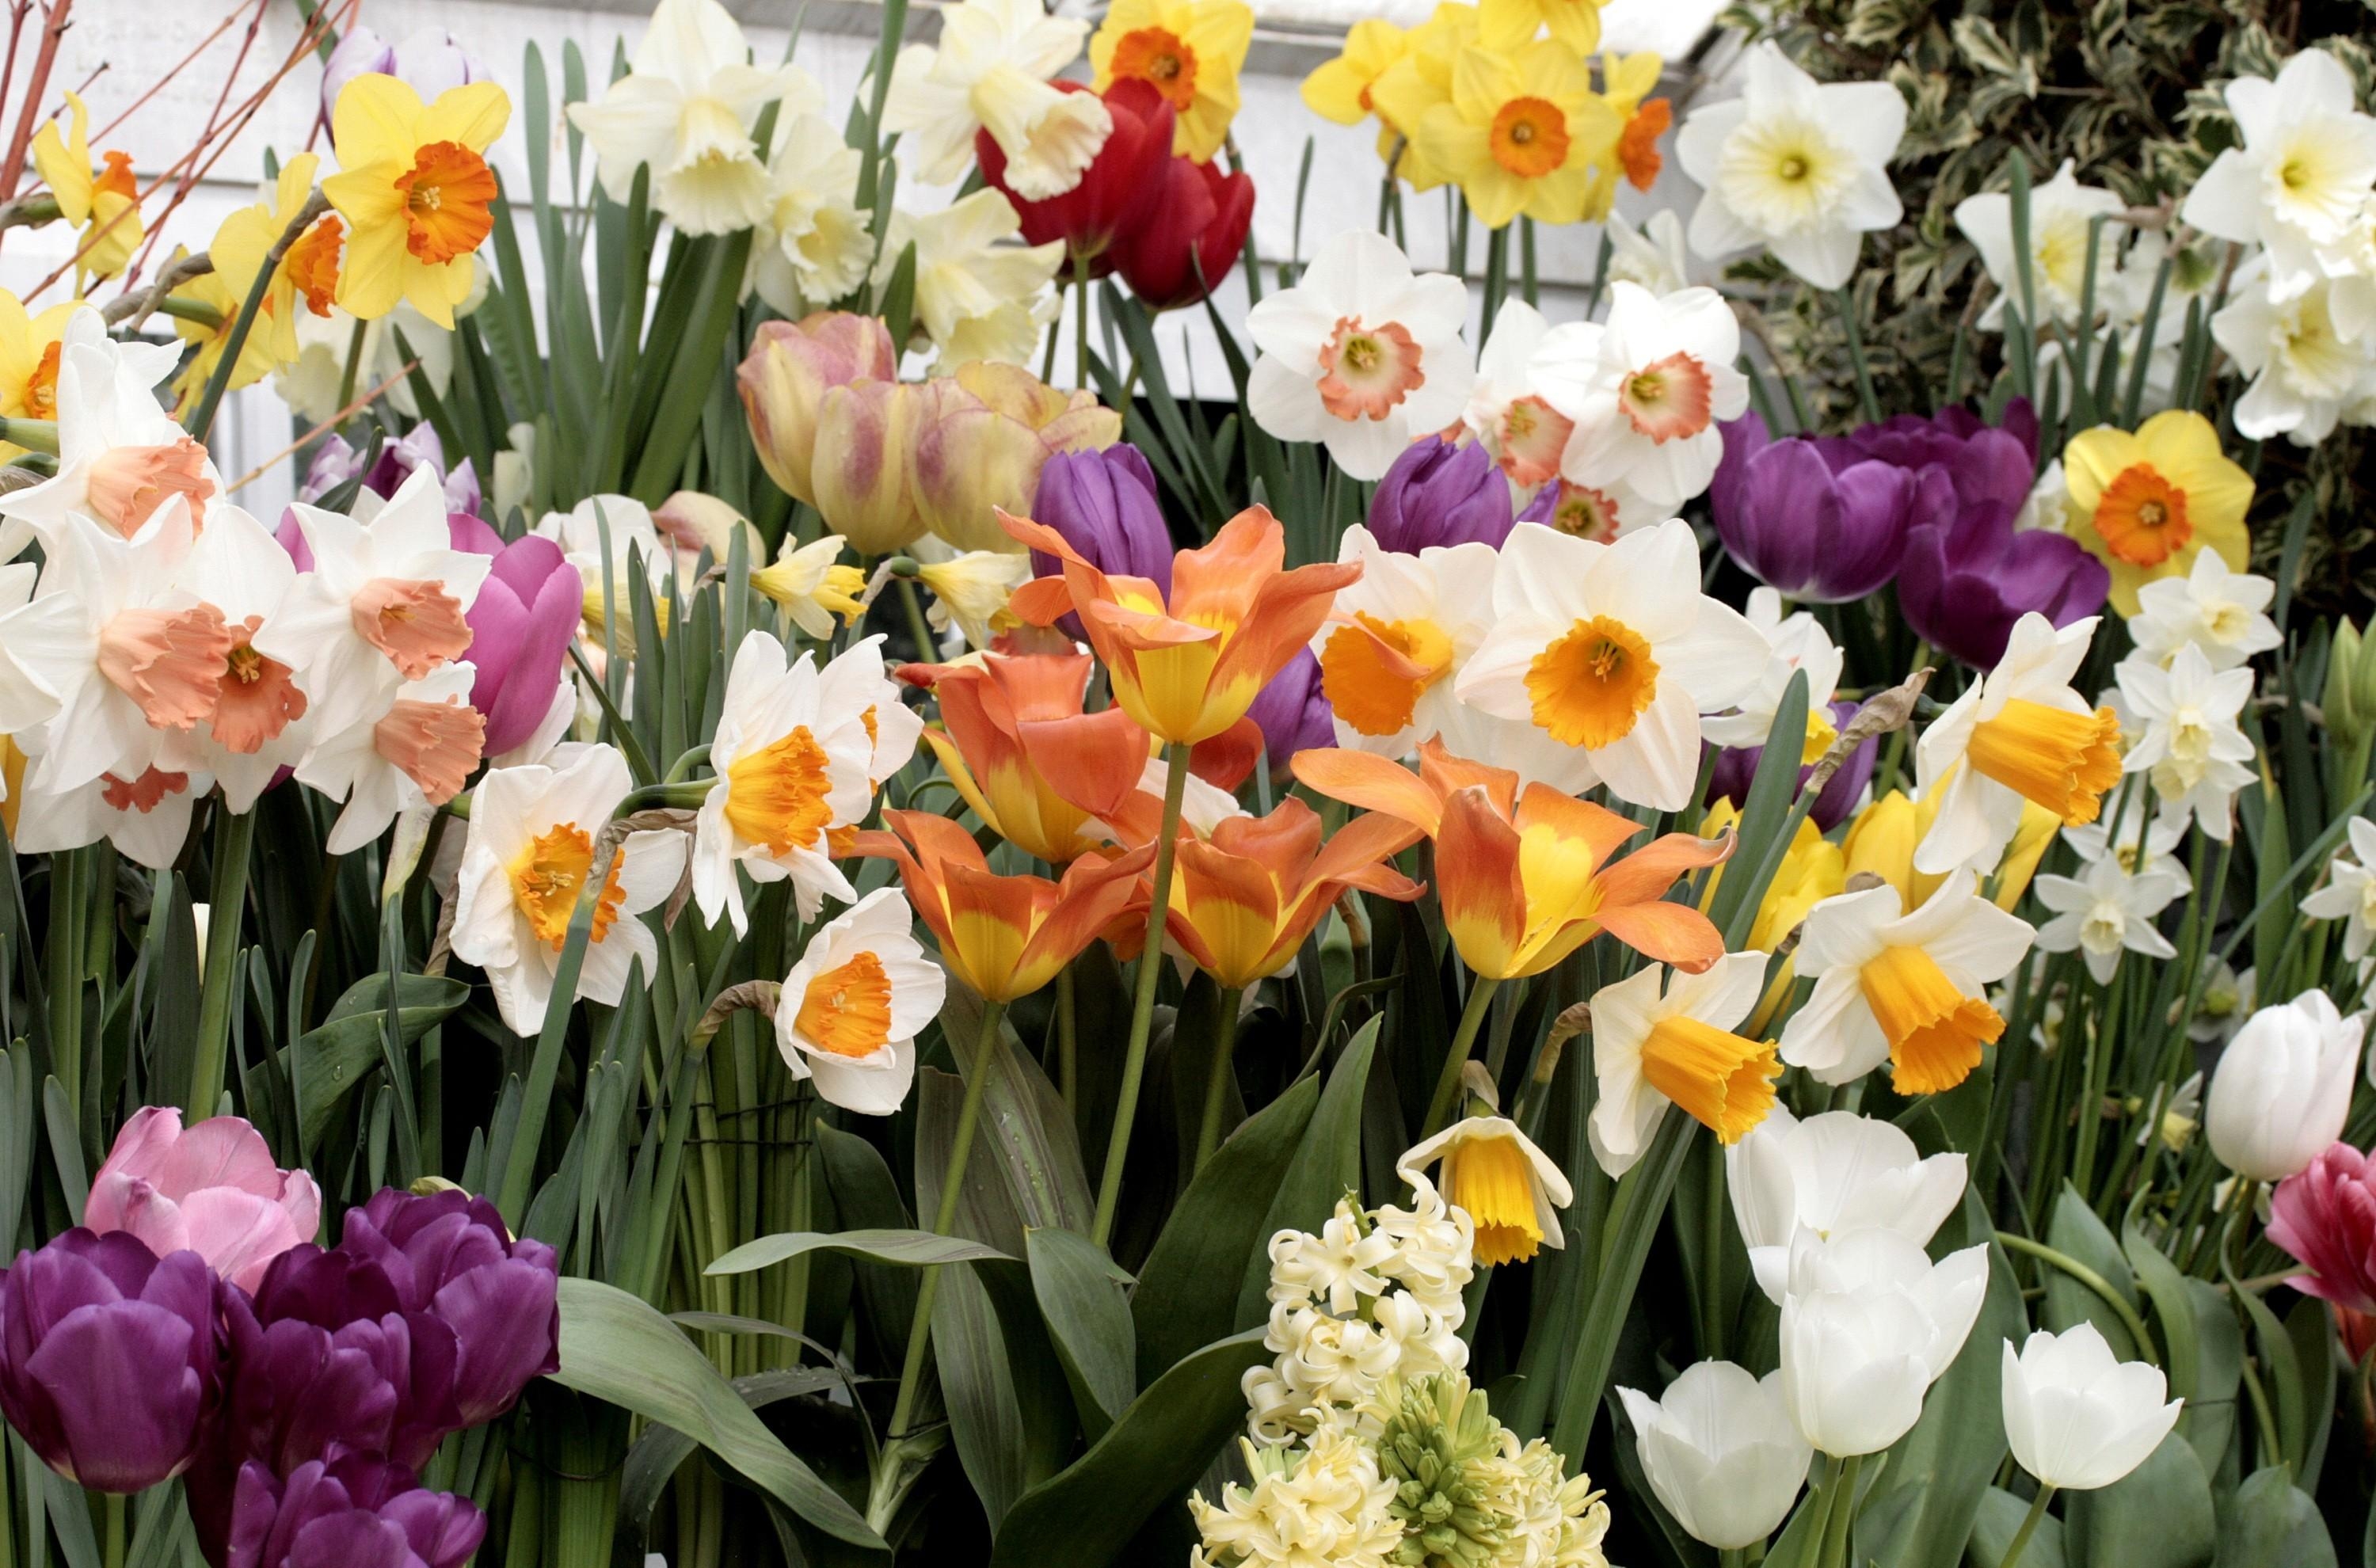 flowers, tulips, narcissussi, hyacinth, flower bed, flowerbed, lots of, multitude QHD